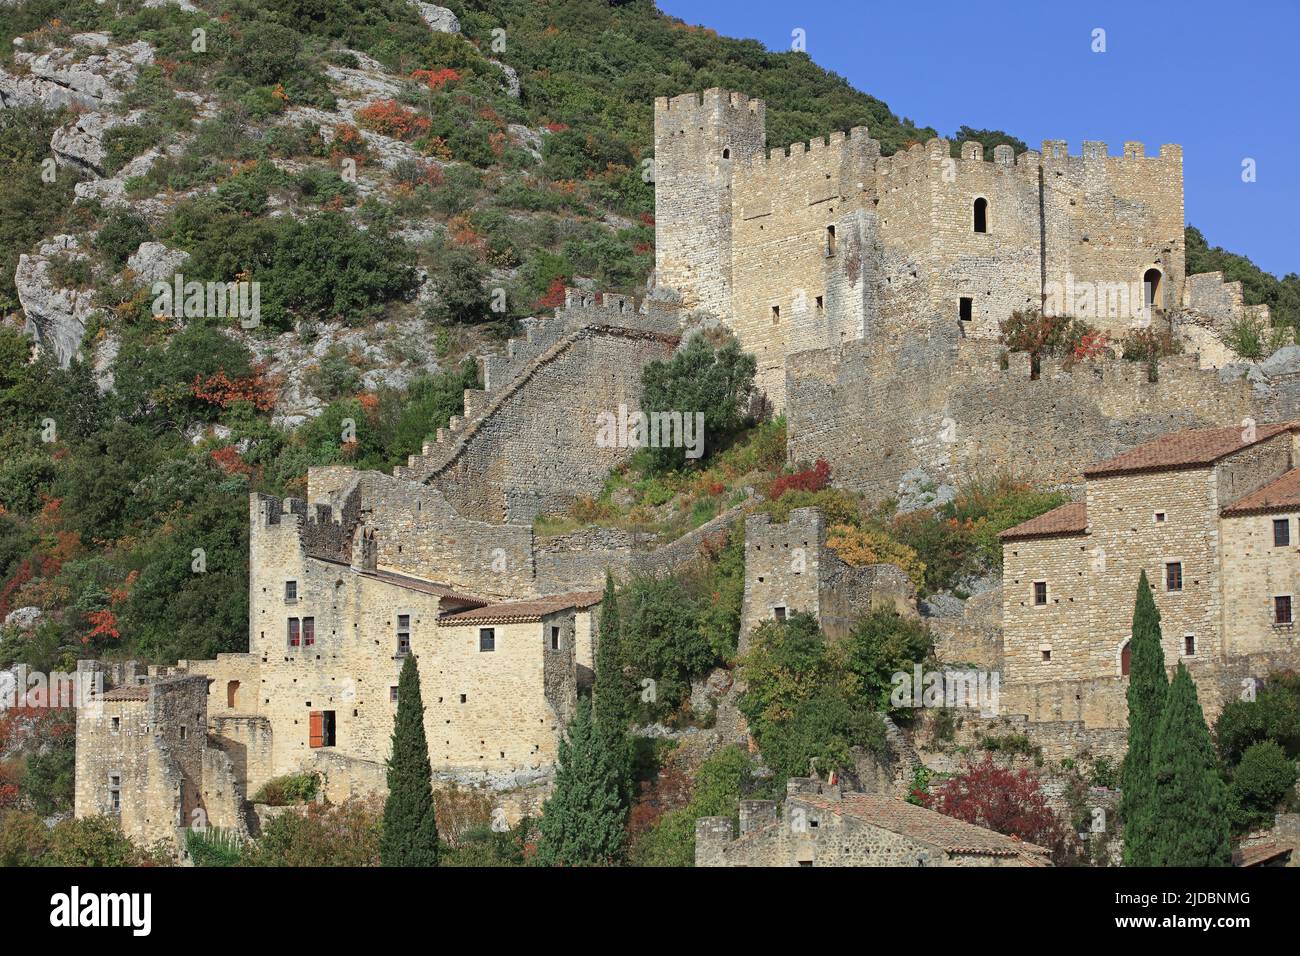 France, Ardèche Saint-Montan medieval village of character dominated by a feudal castle Stock Photo